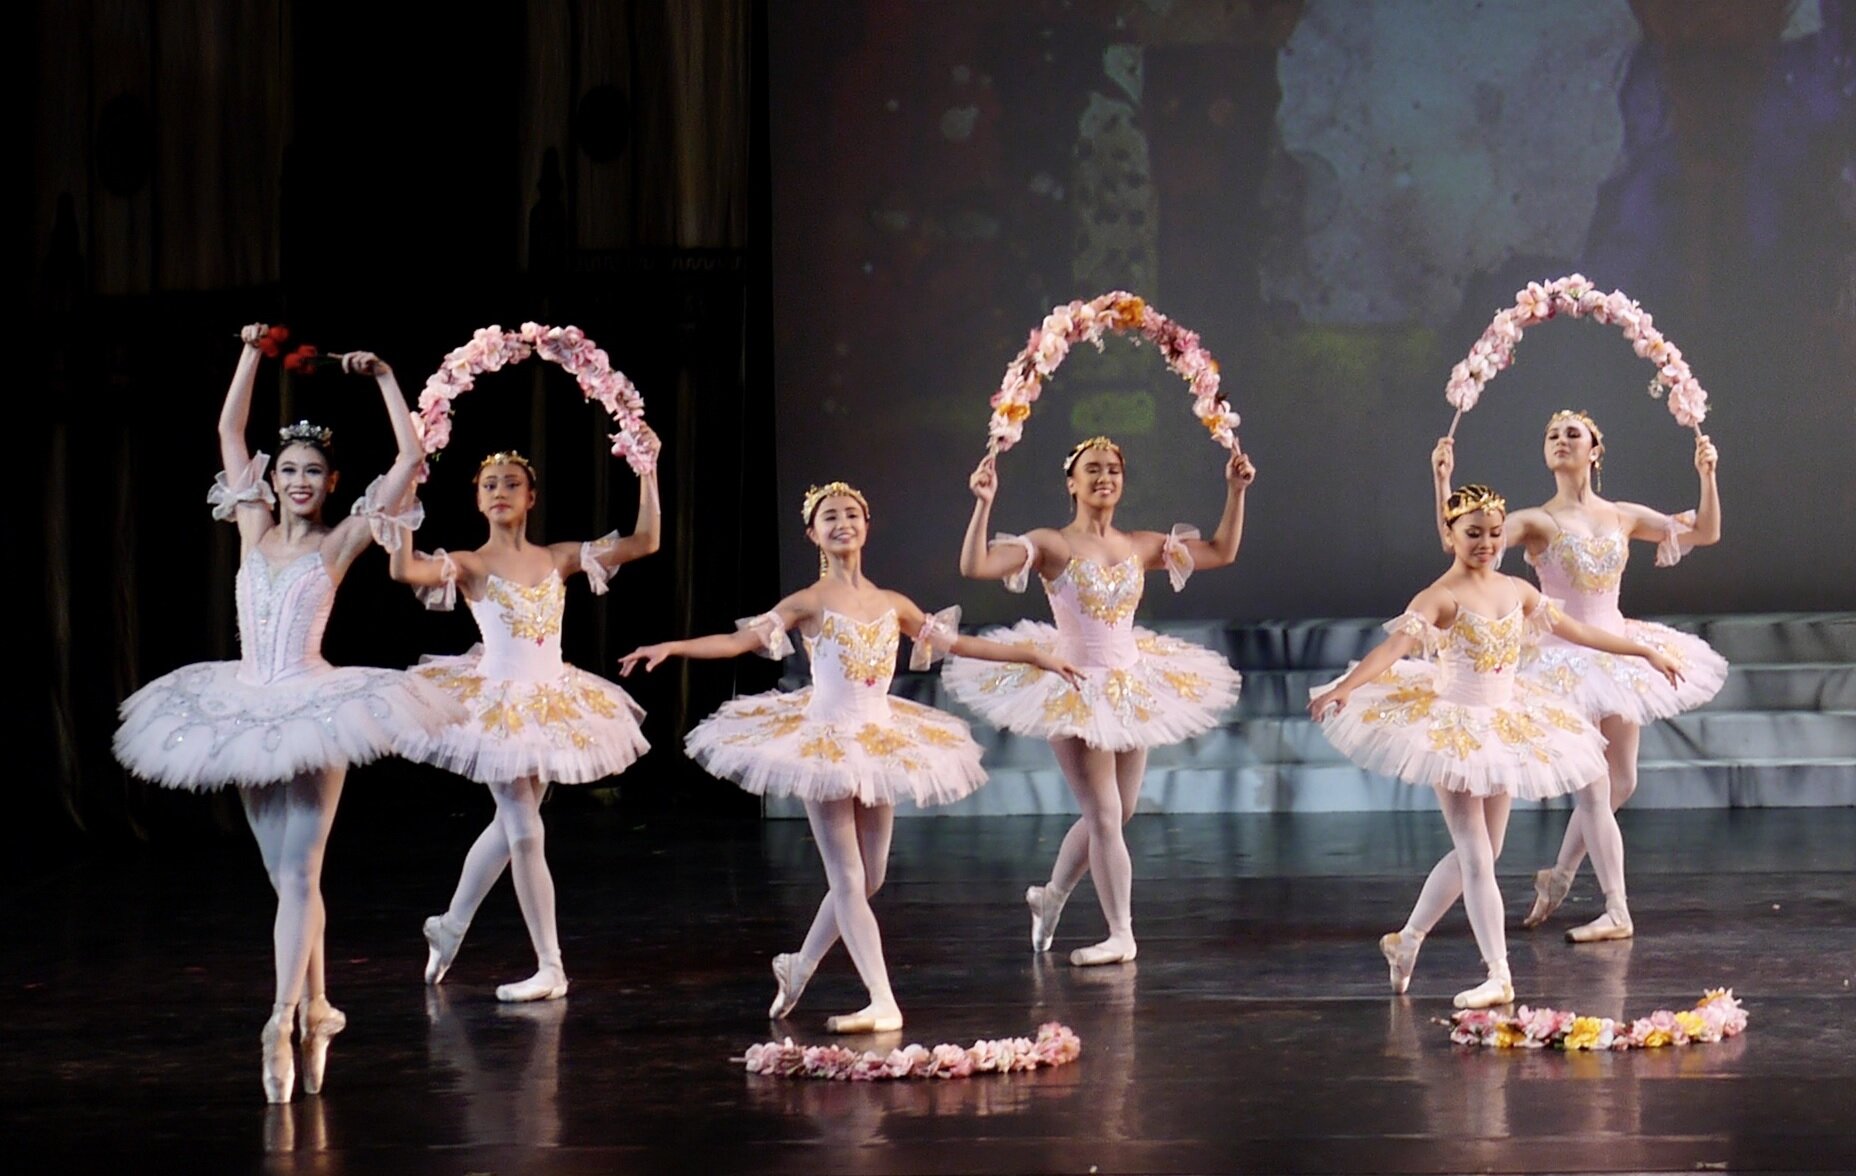    Everything’s coming up roses for Medora (Abigail Oliveiro, leftmost) as she leads the ballerinas in the dreamy Living Garden sequence in the pirate adventure  Le Corsaire  (2018). Their blush pink tutus lend an even more enchanting touch to the sc